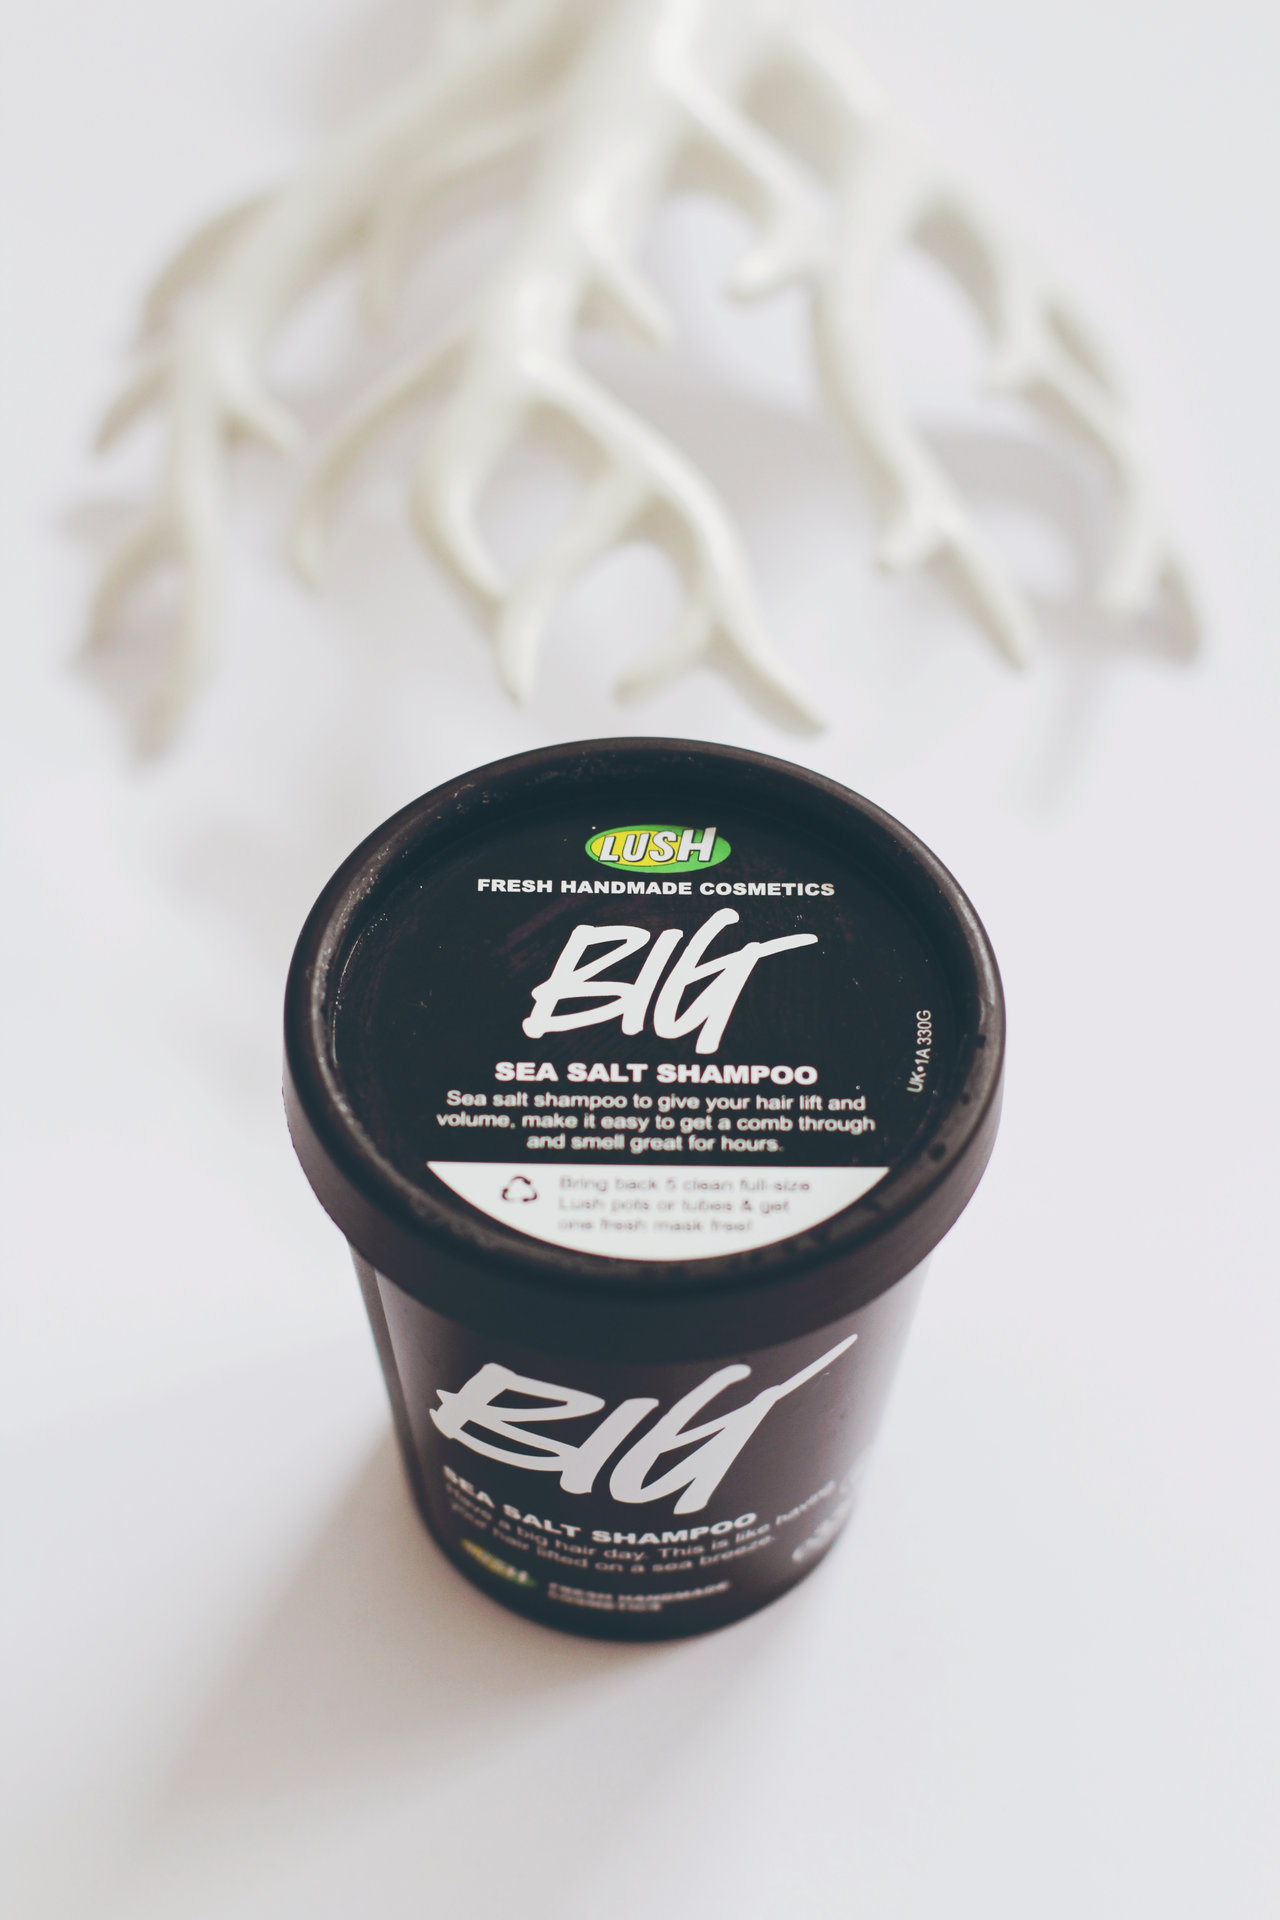 LUSH: My Top 5 Must-Haves